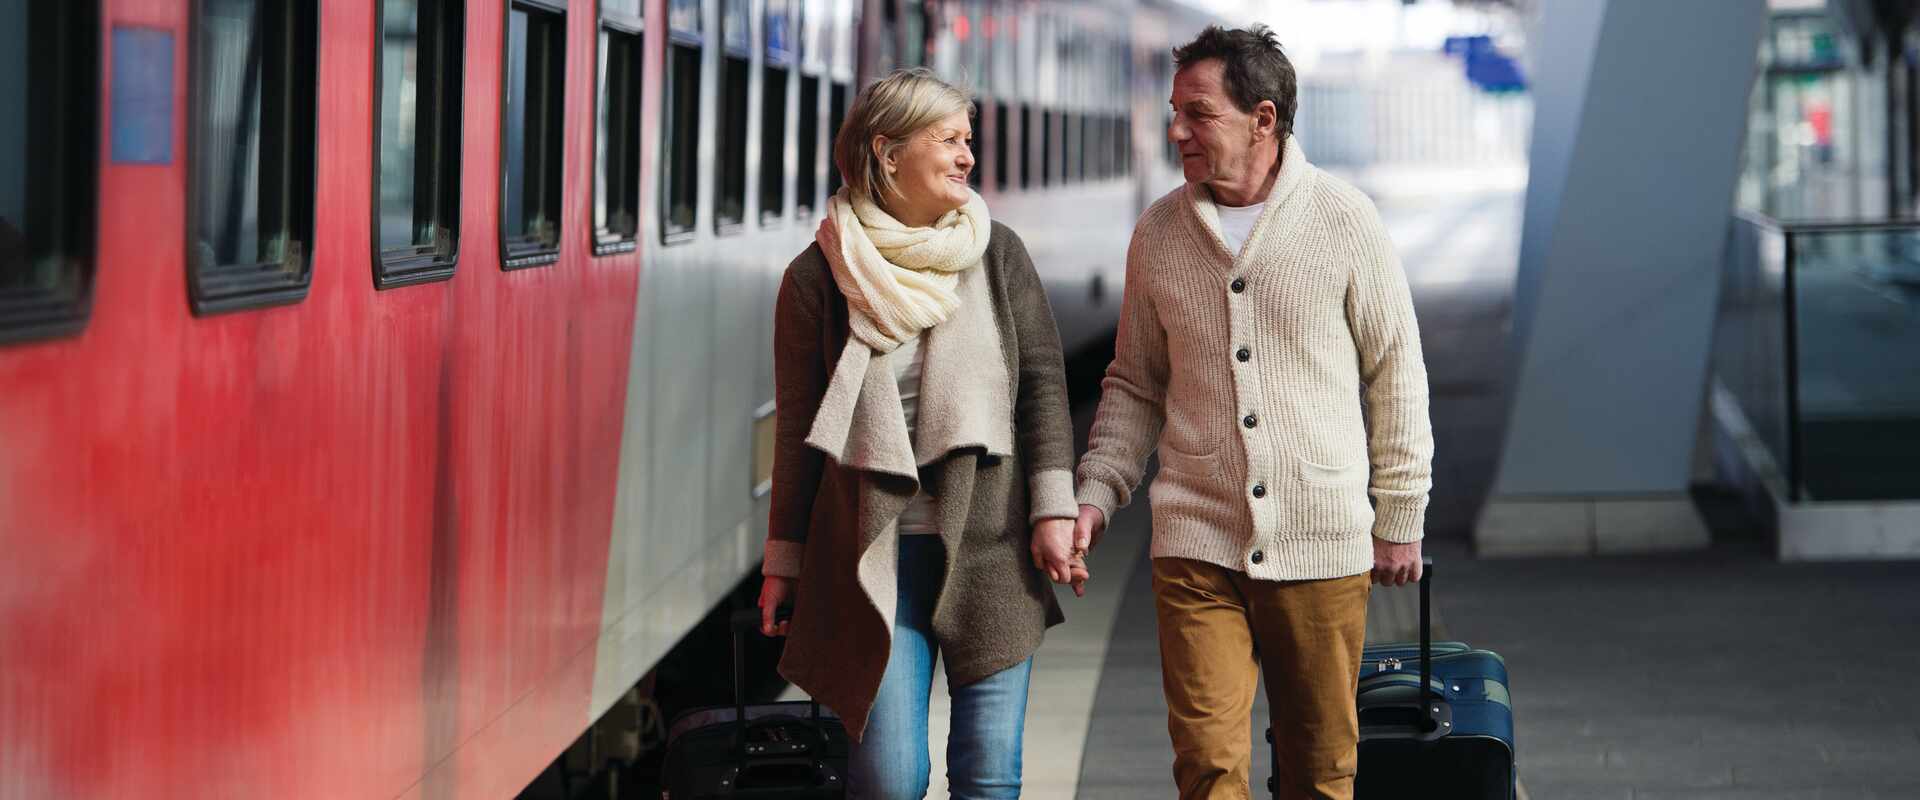 Couple at train station